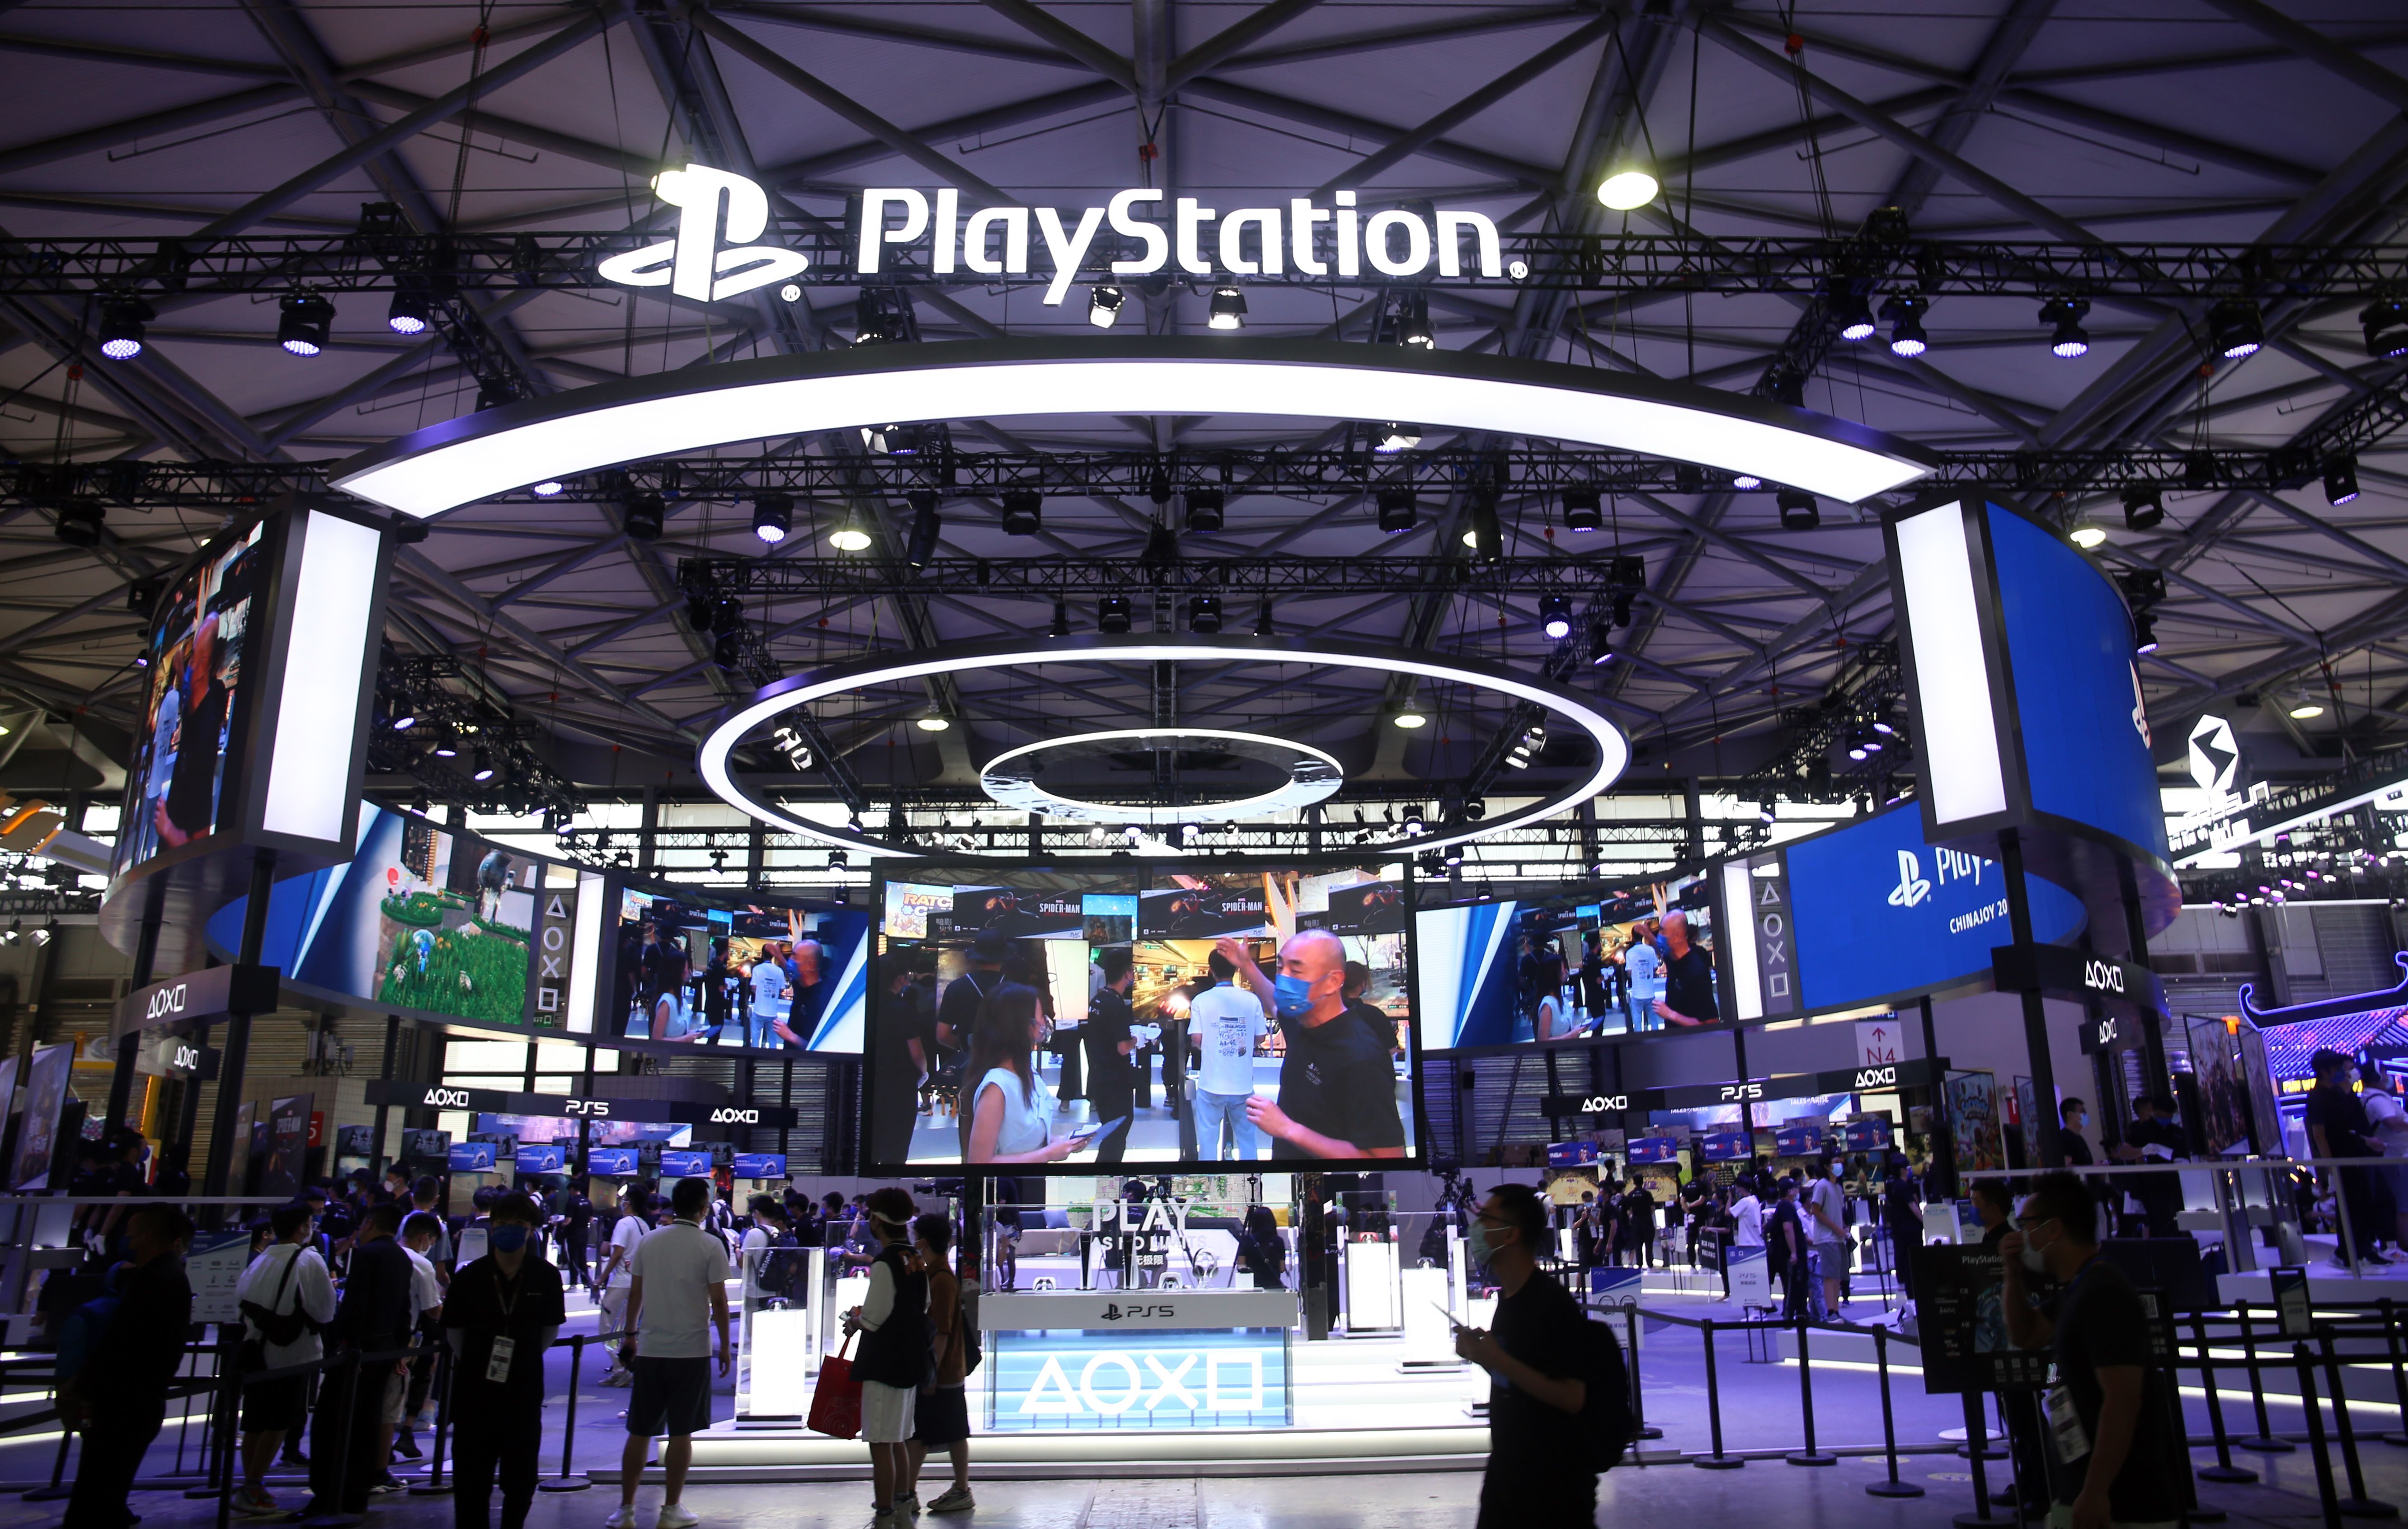 The PlayStation booth at the ChinaJoy convention